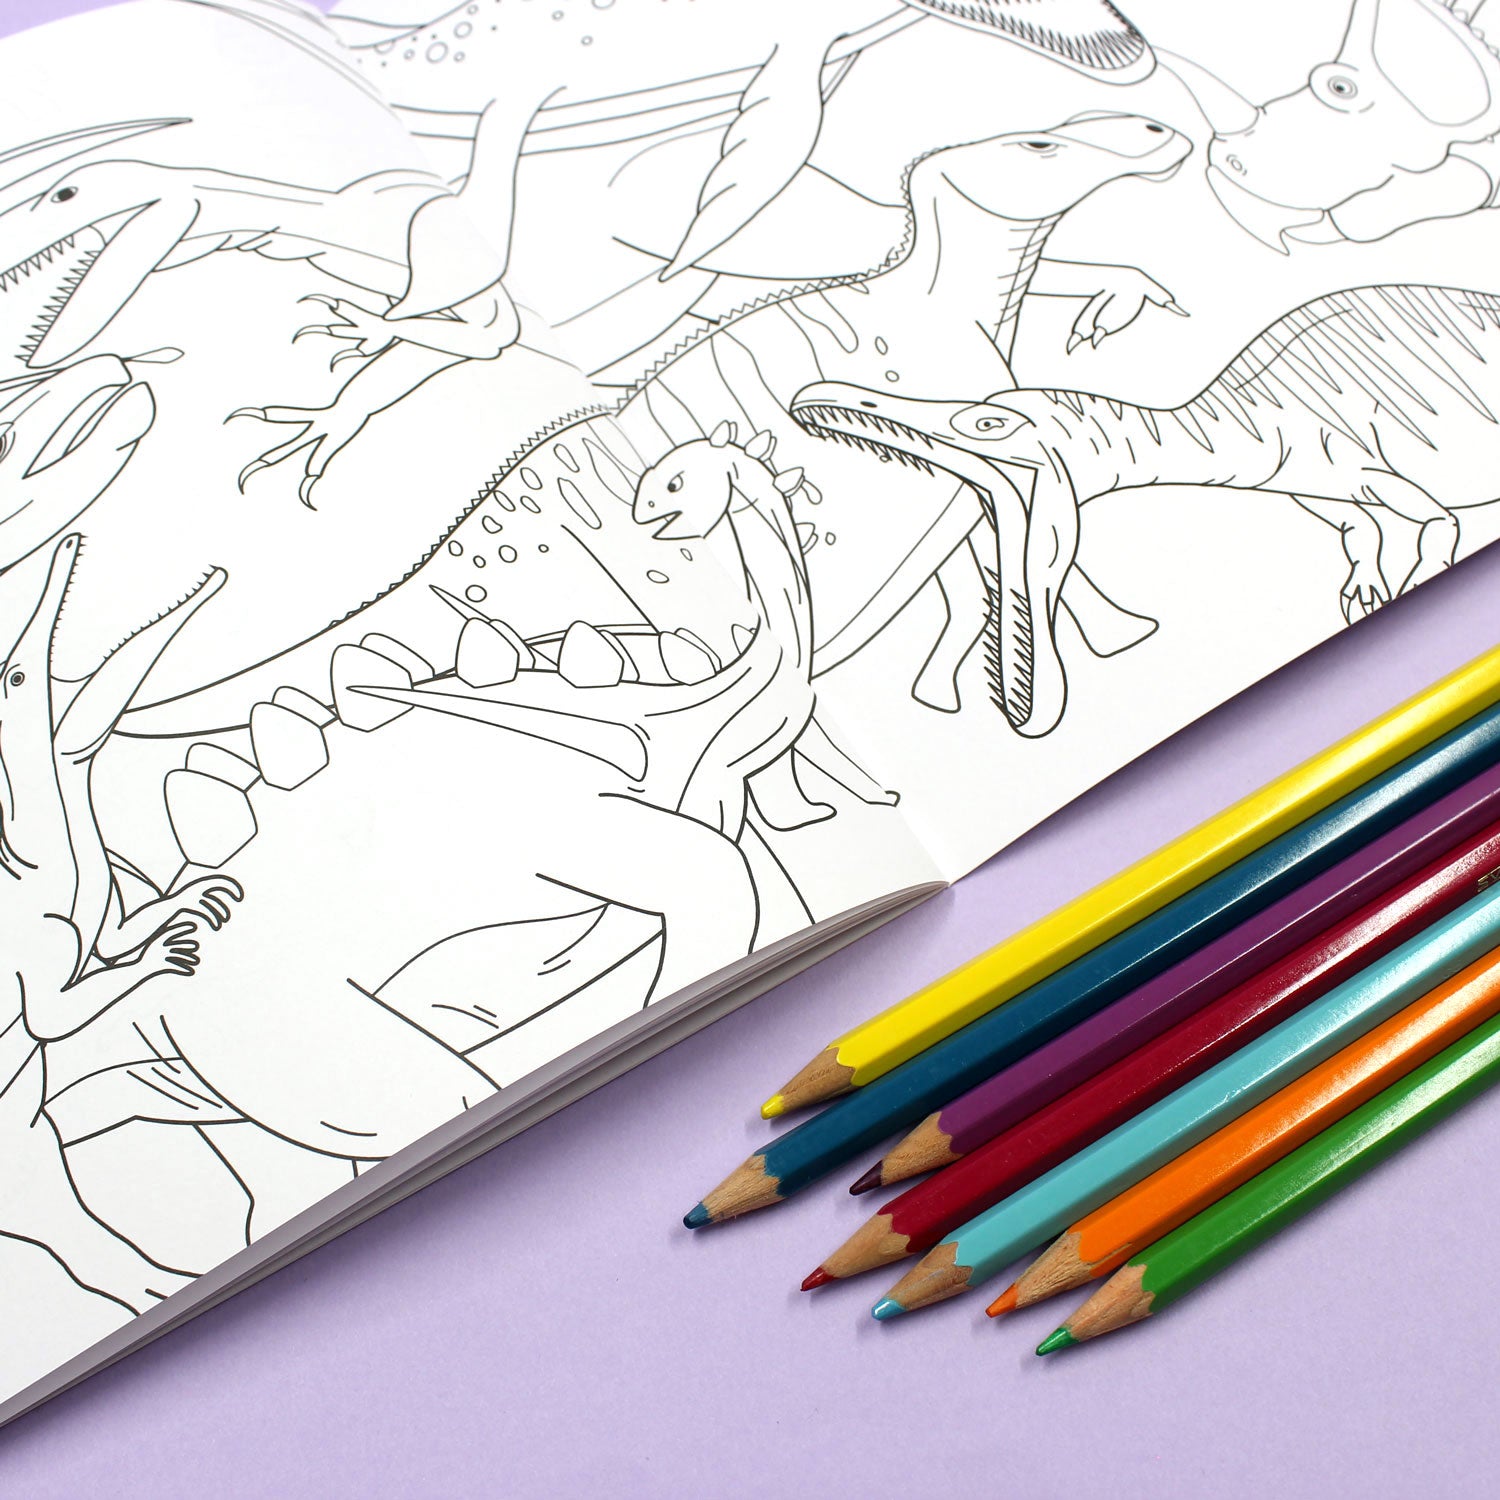 Inside page of 1234 Dinosaur colouring book featuring a collage of black line drawings of dinosaurs featured in the book